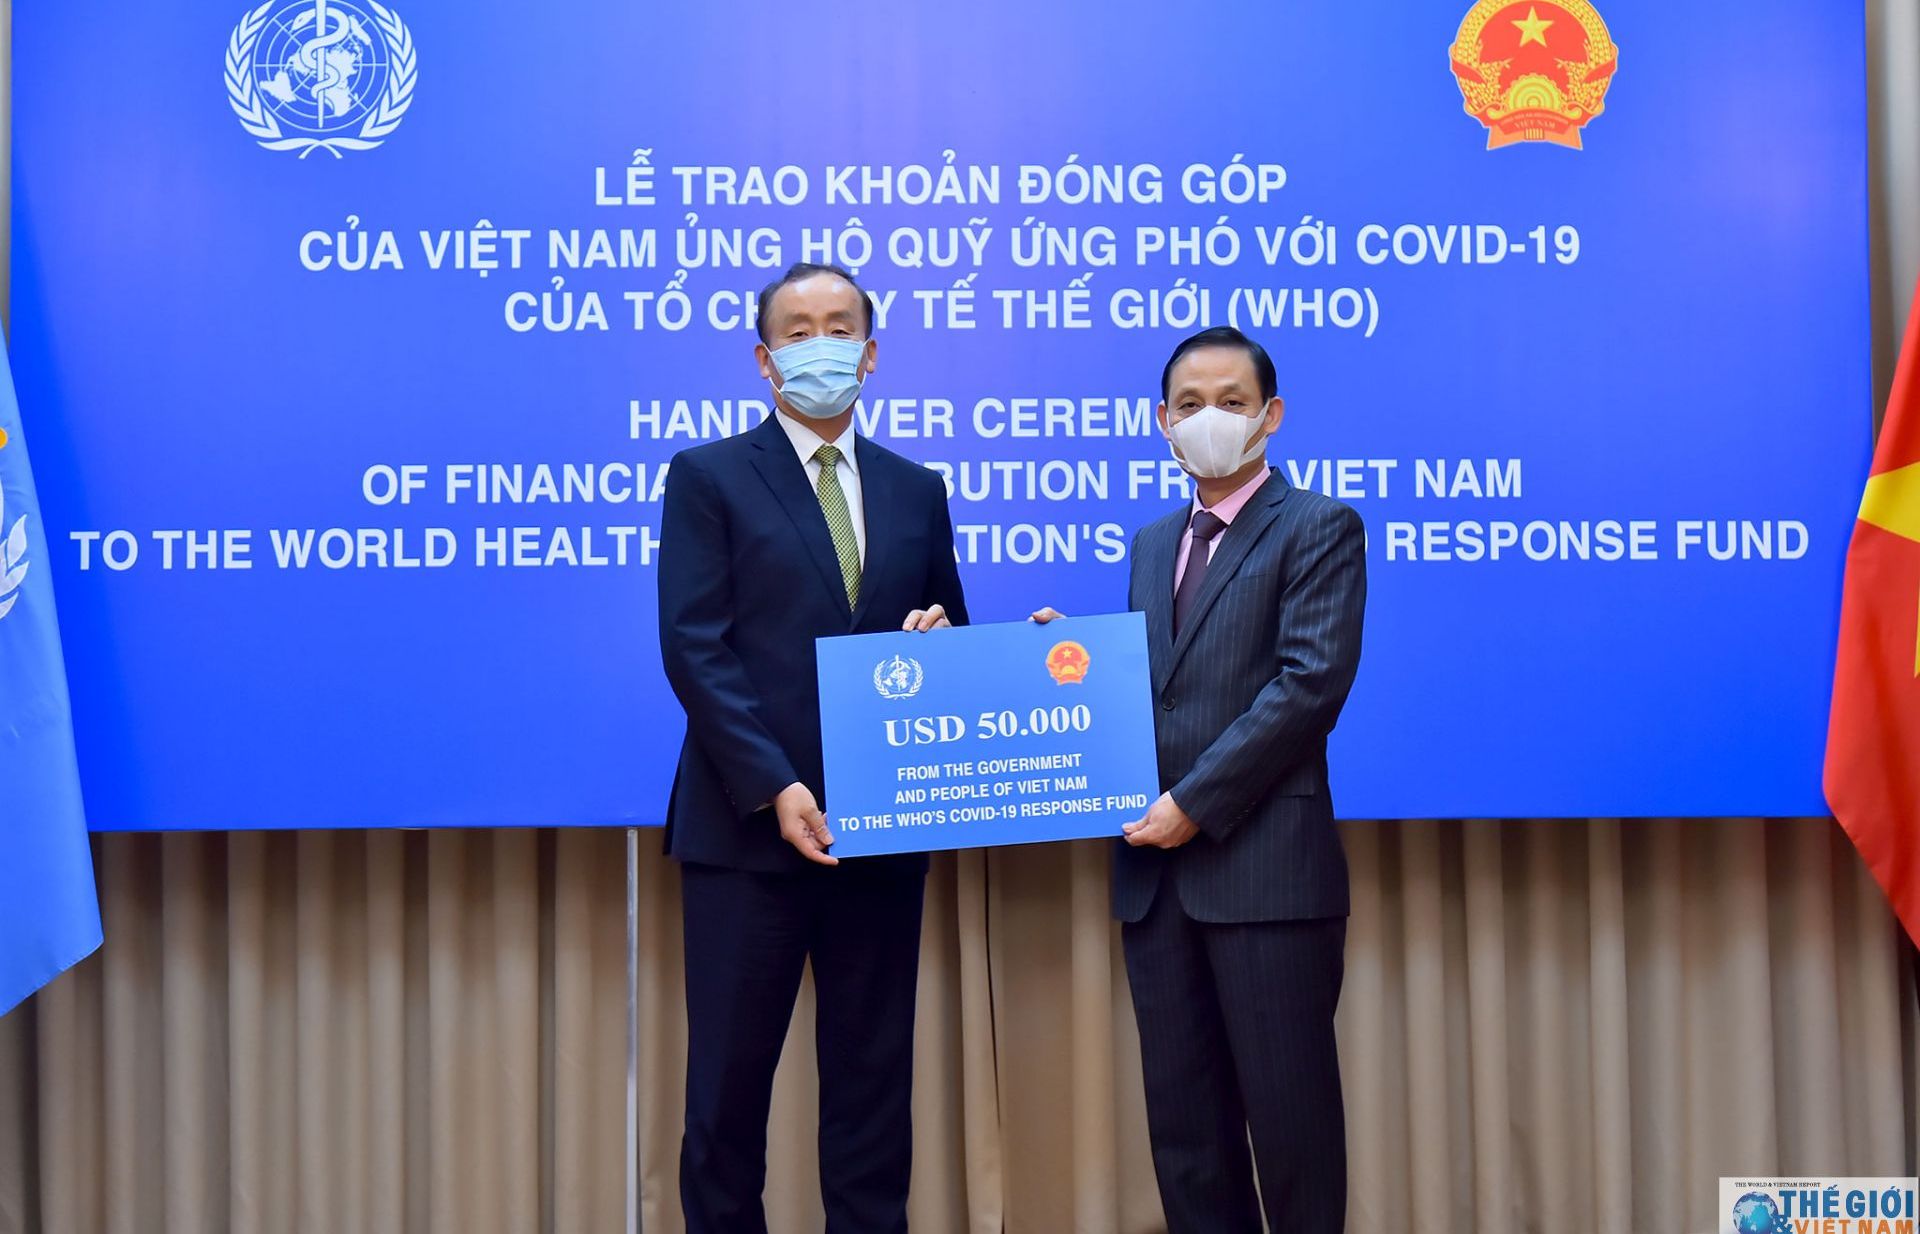 Vietnam contributes US$50,000 to WHO's COVID-19 response fund